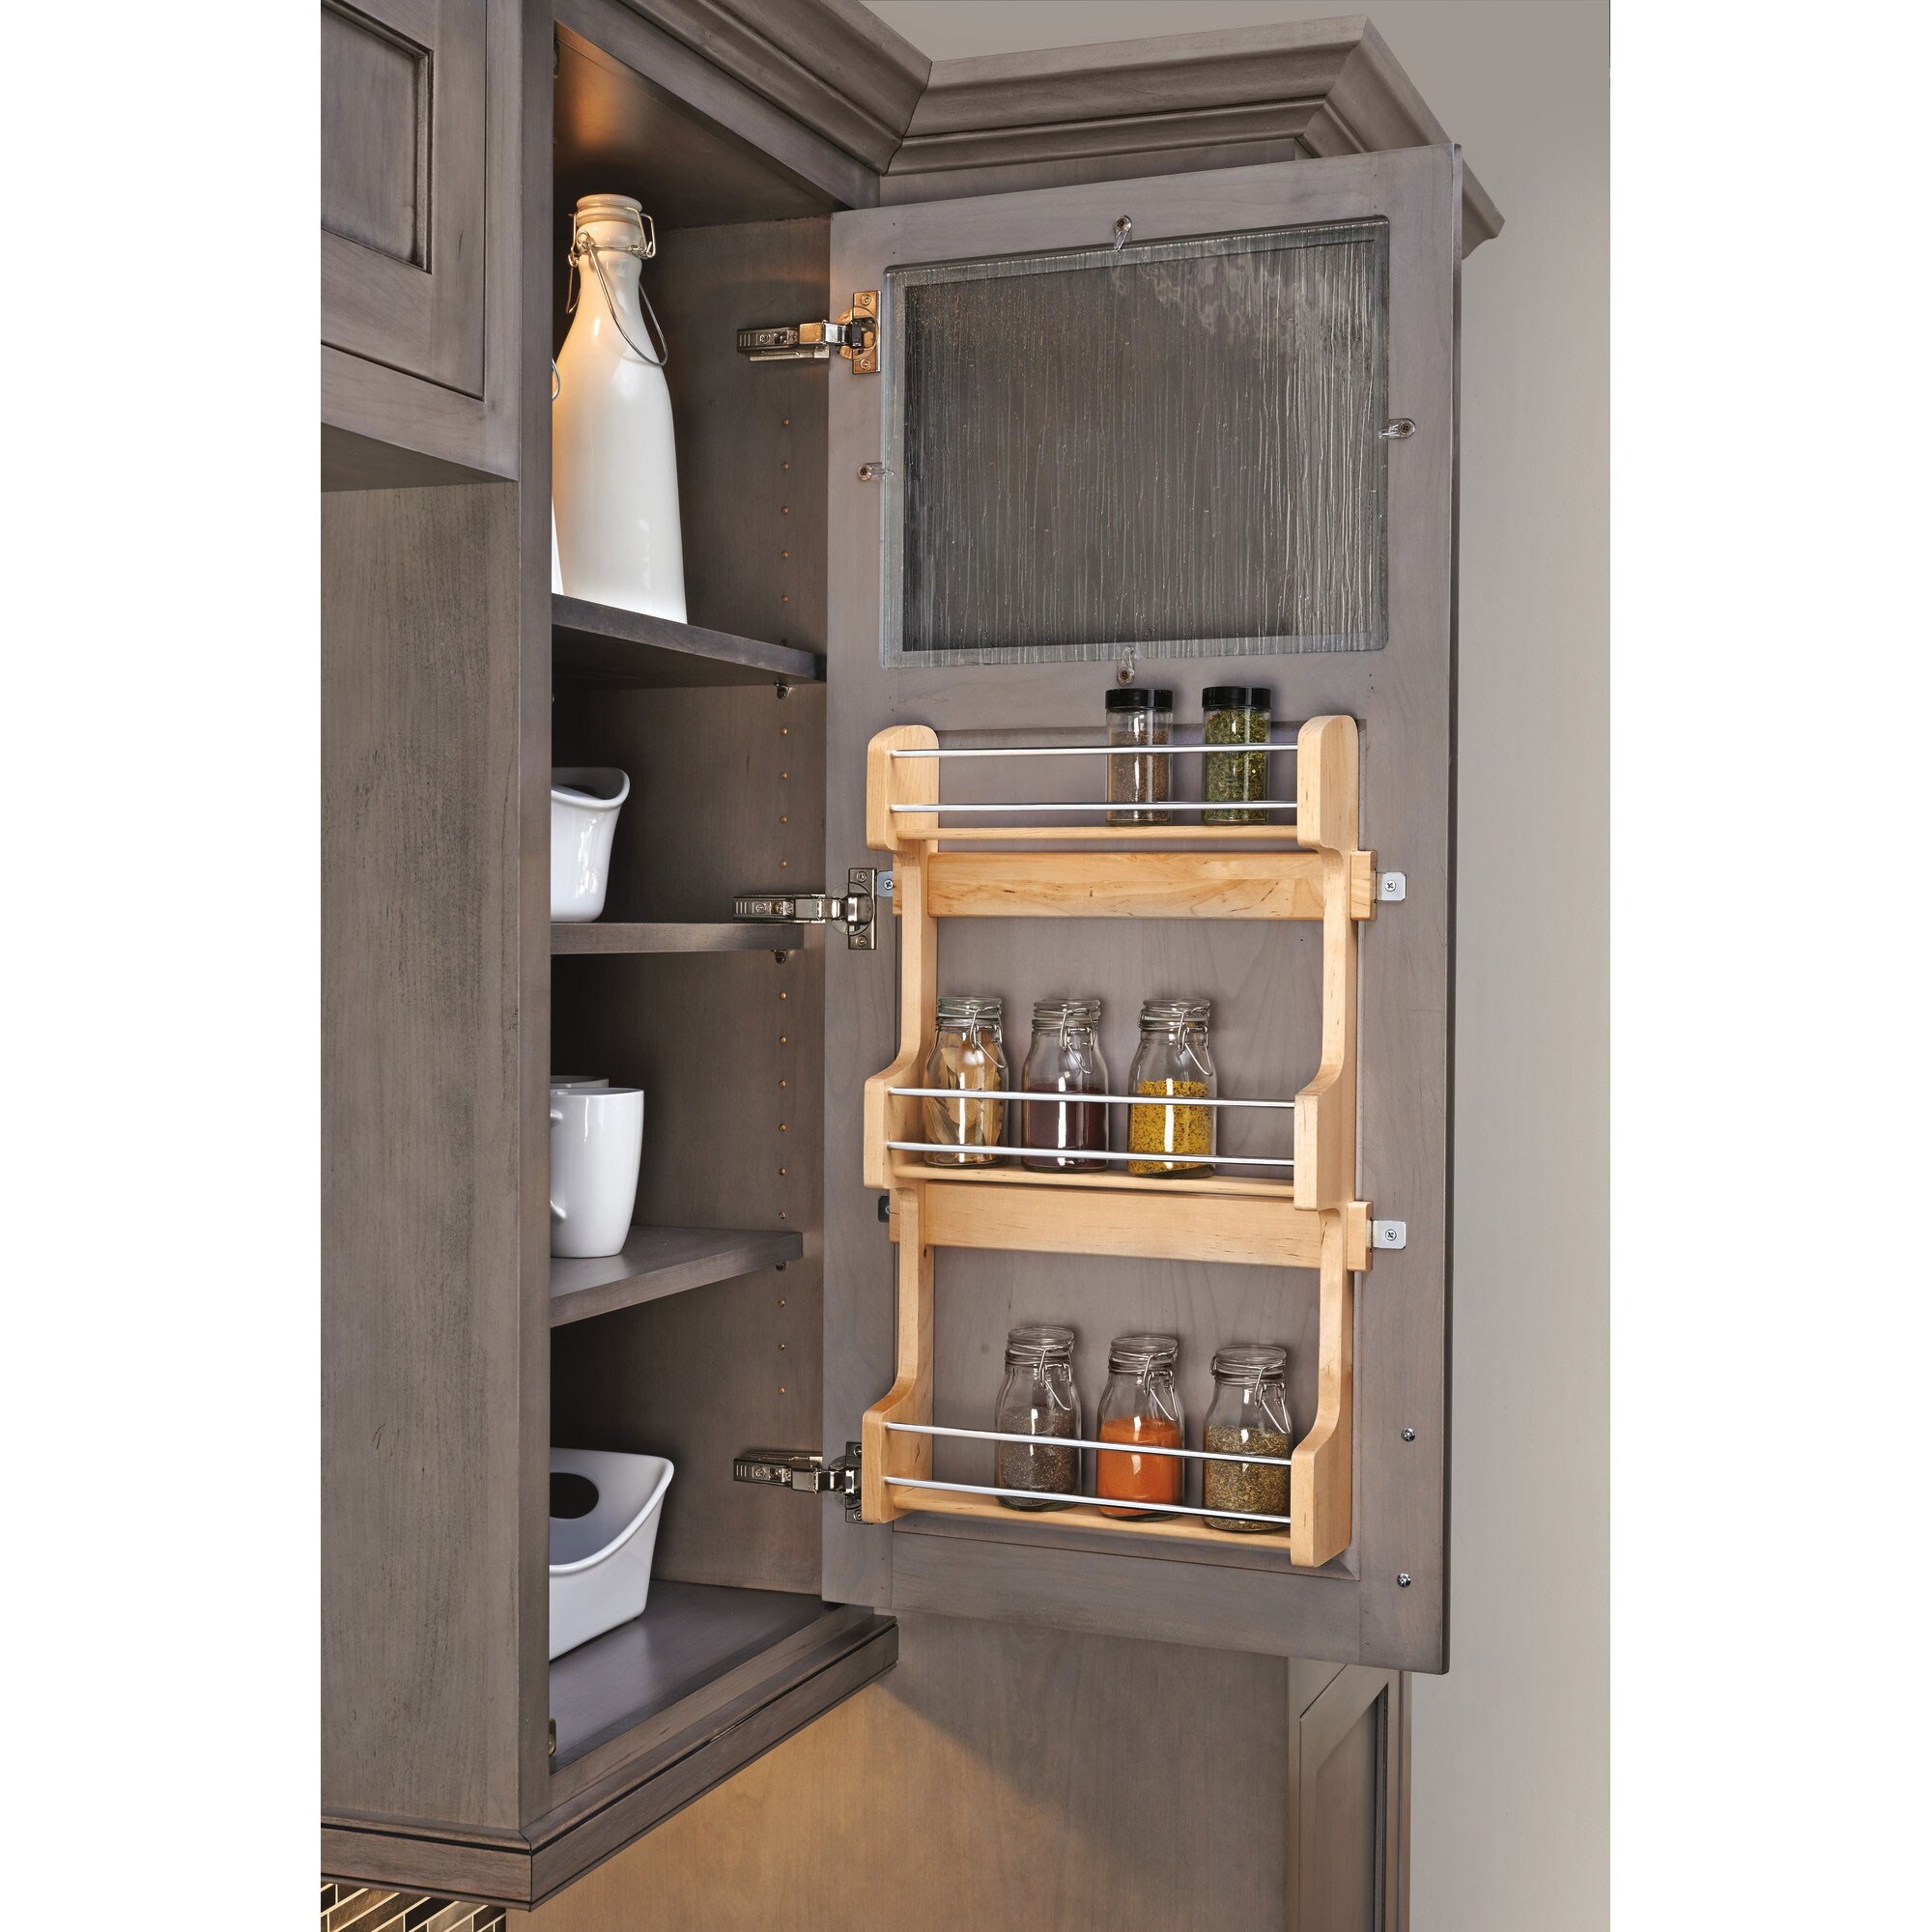 https://ak1.ostkcdn.com/images/products/is/images/direct/5eeb757de981de5bbf2f8c236a07171df2f8c887/Rev-A-Shelf-4SR-18-18-Inch-Cabinet-Door-Mounted-Wood-3-Shelf-Storage-Spice-Rack.jpg